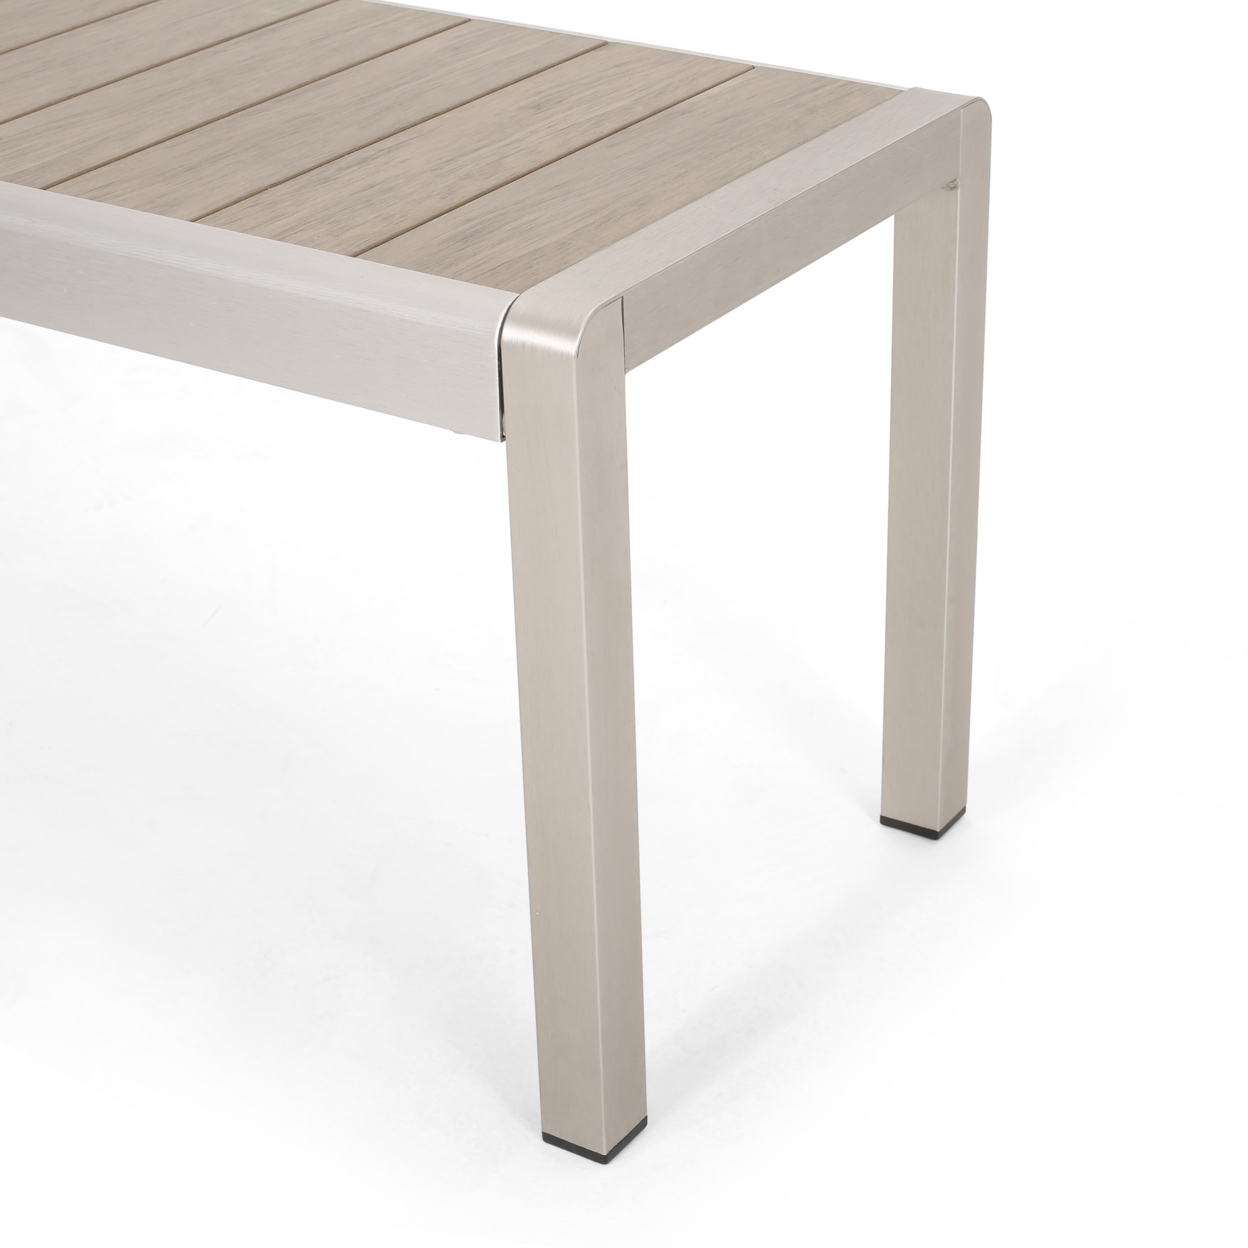 Odelia Outdoor Modern Aluminum Dining Bench With Faux Wood Seat - Natural Finish + Silver